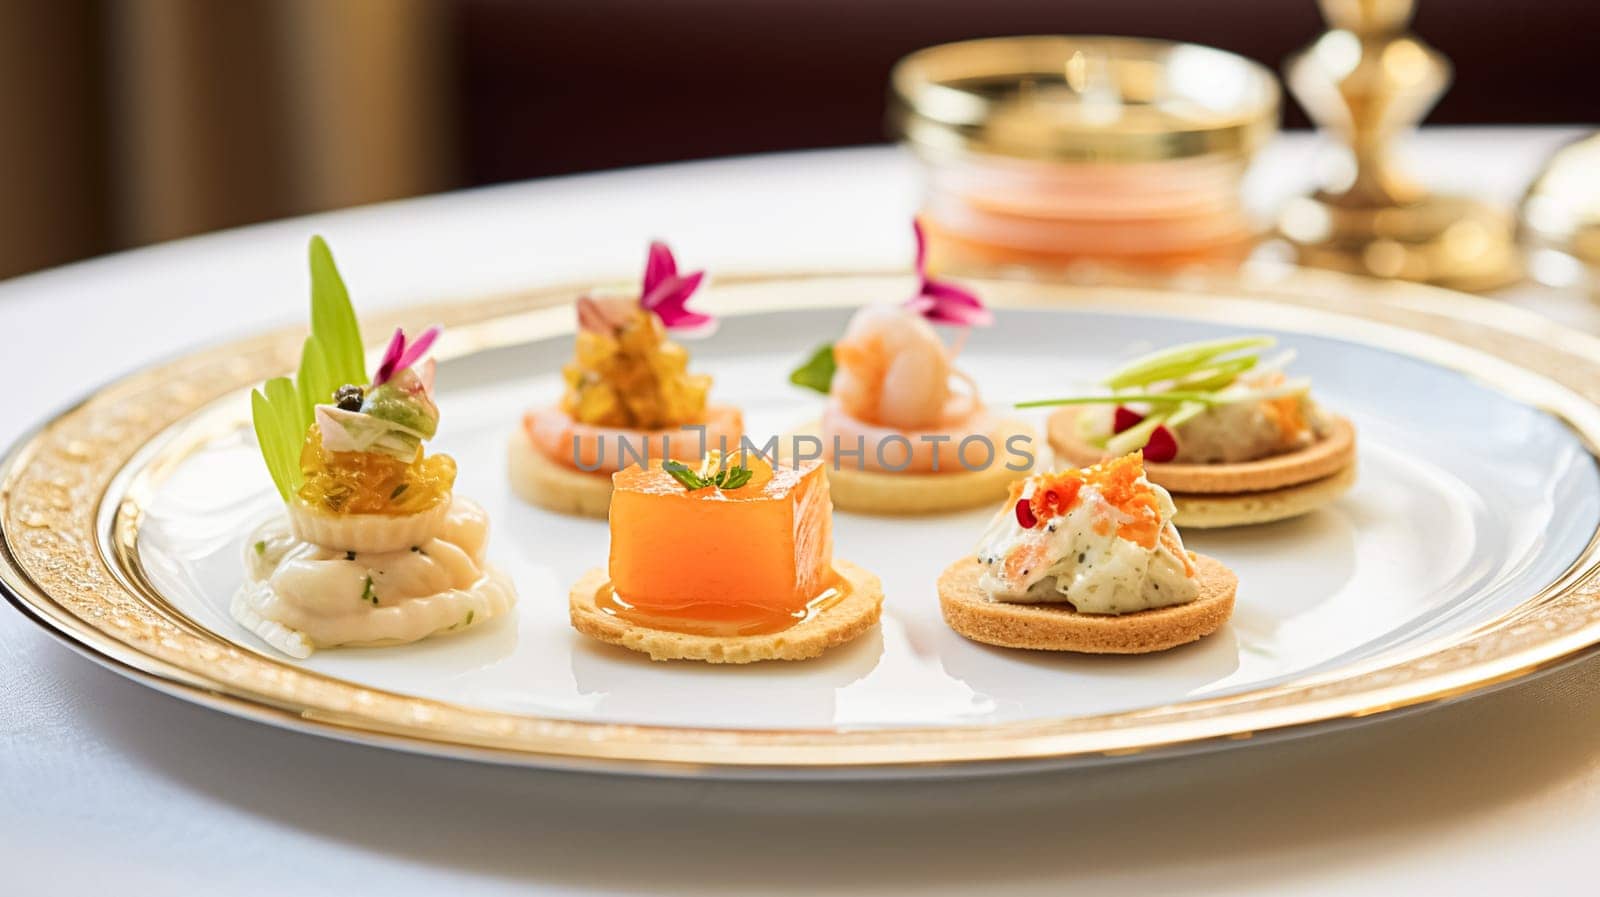 Food, hospitality and room service, starter appetisers as exquisite cuisine in hotel restaurant a la carte menu, culinary art and fine dining by Anneleven